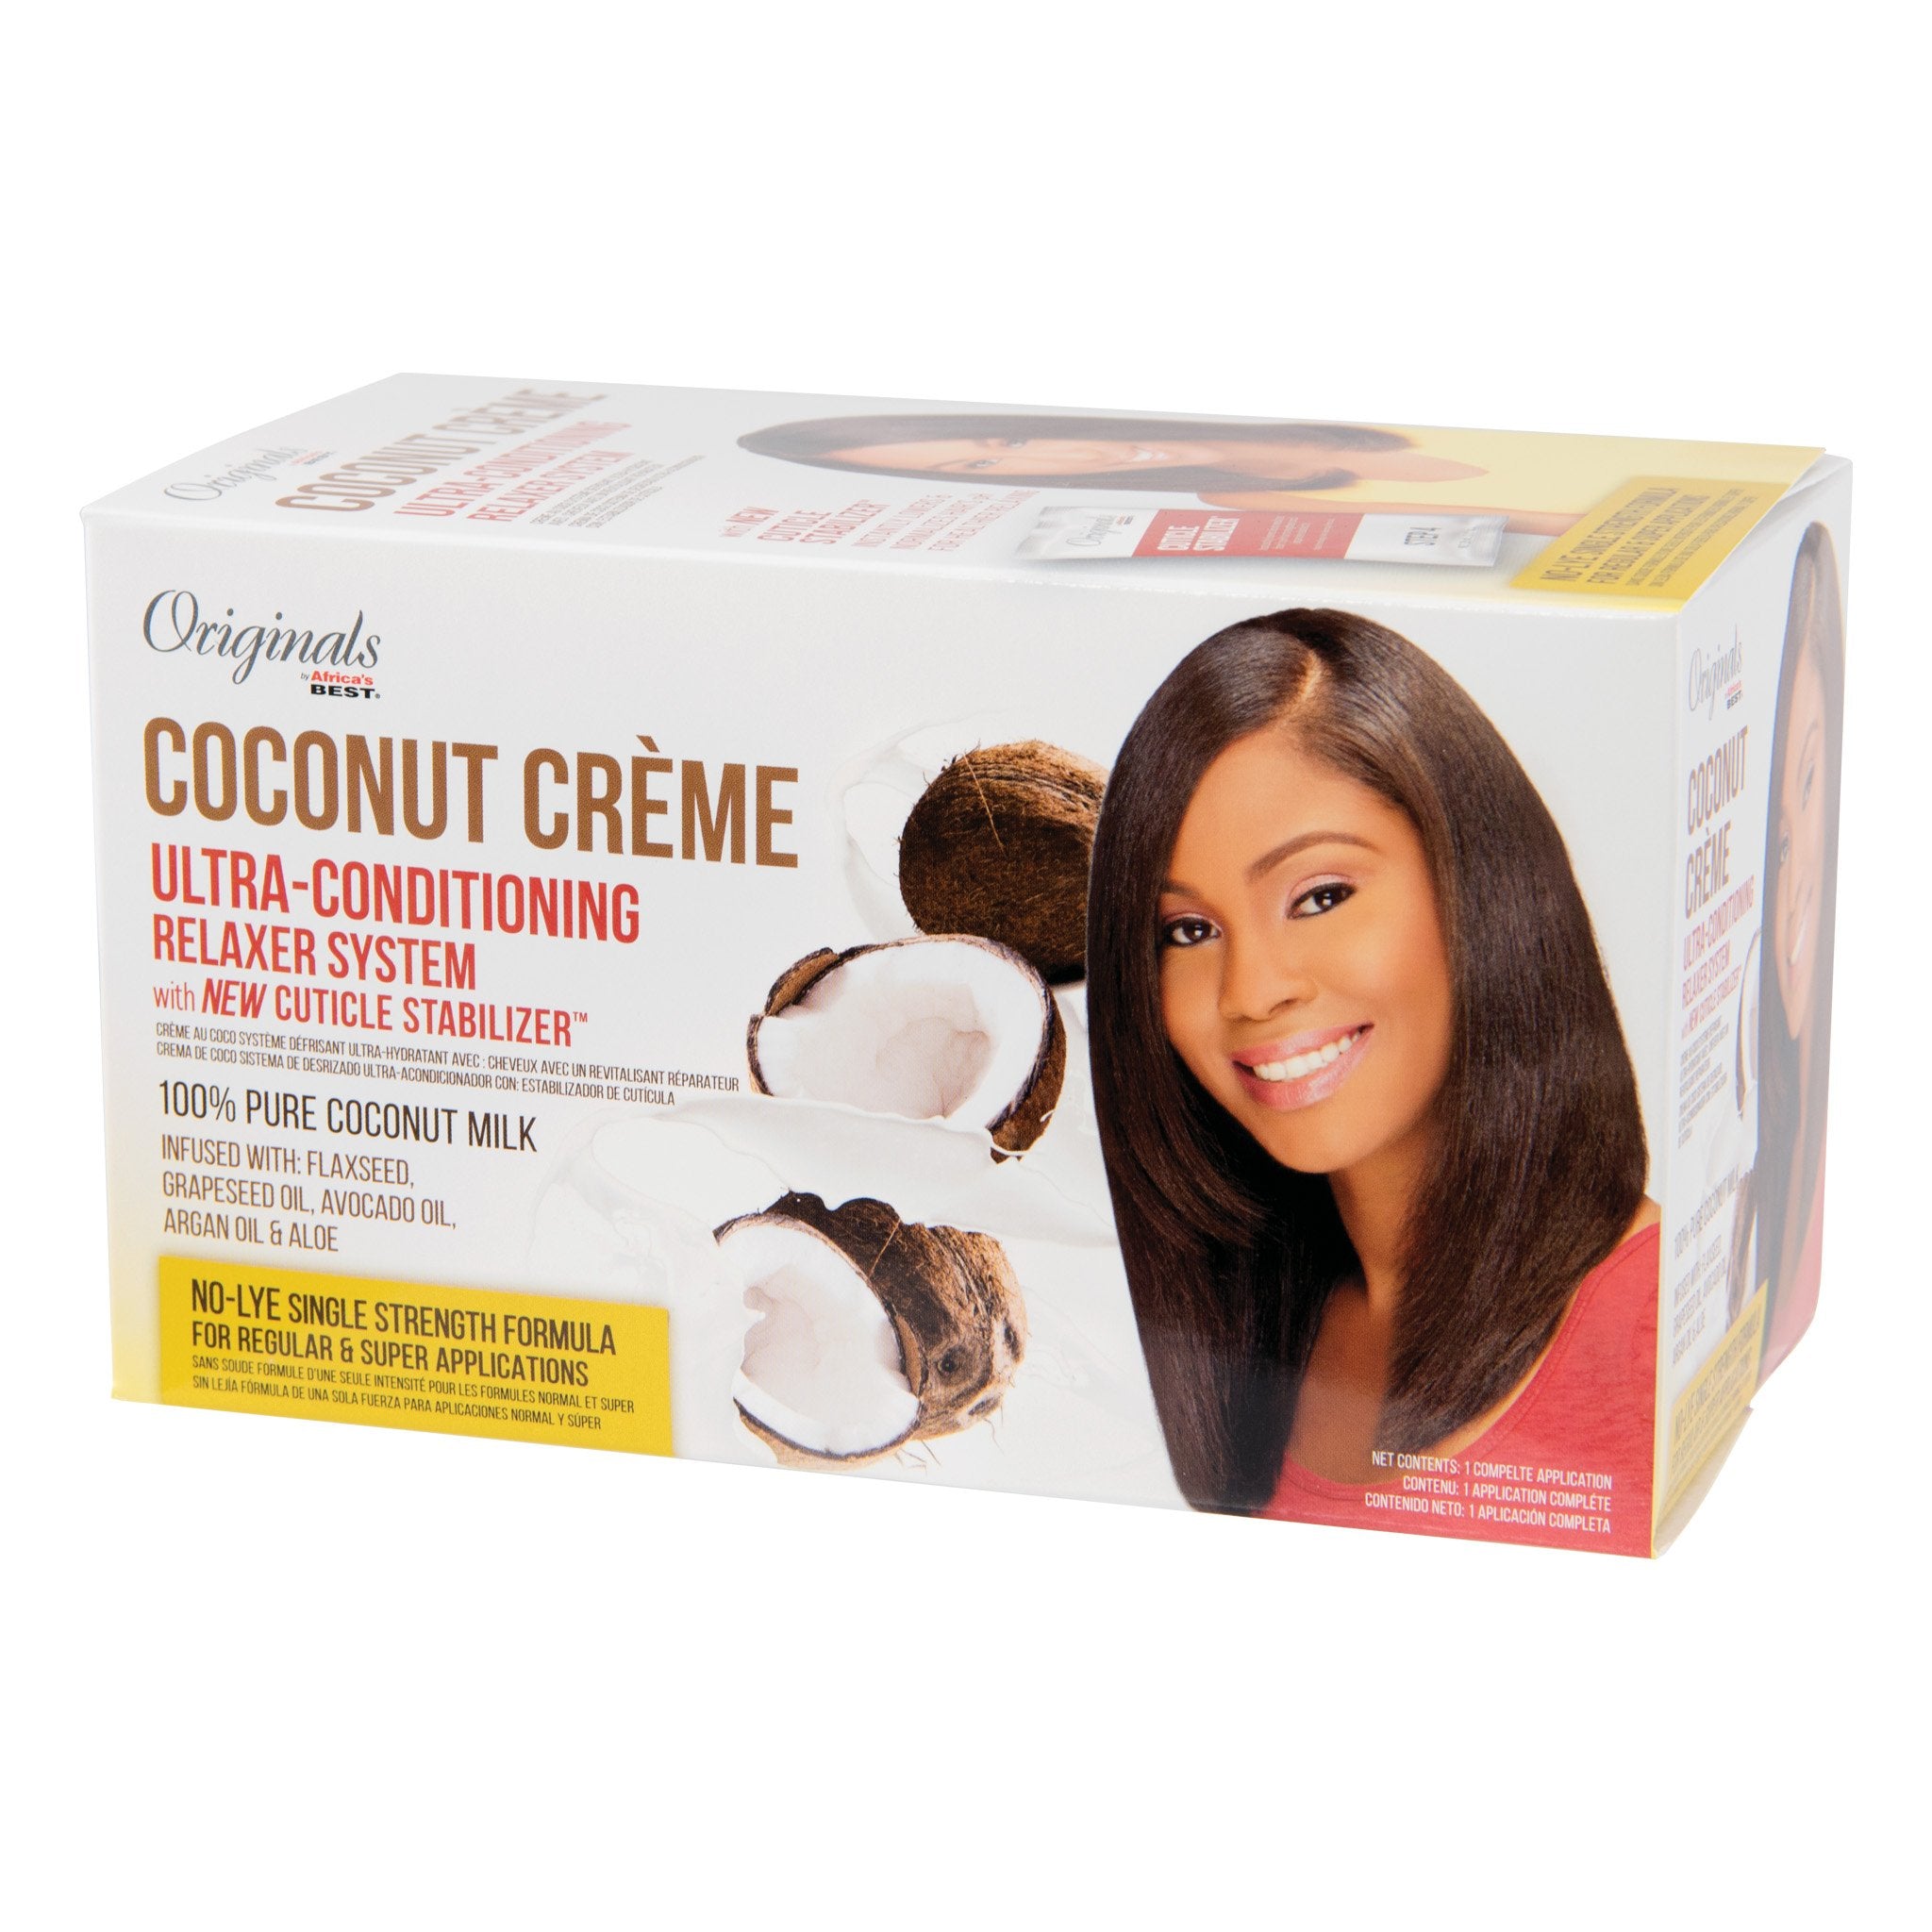 Originals Coconut Crème Ultra-Conditioning Relaxer System